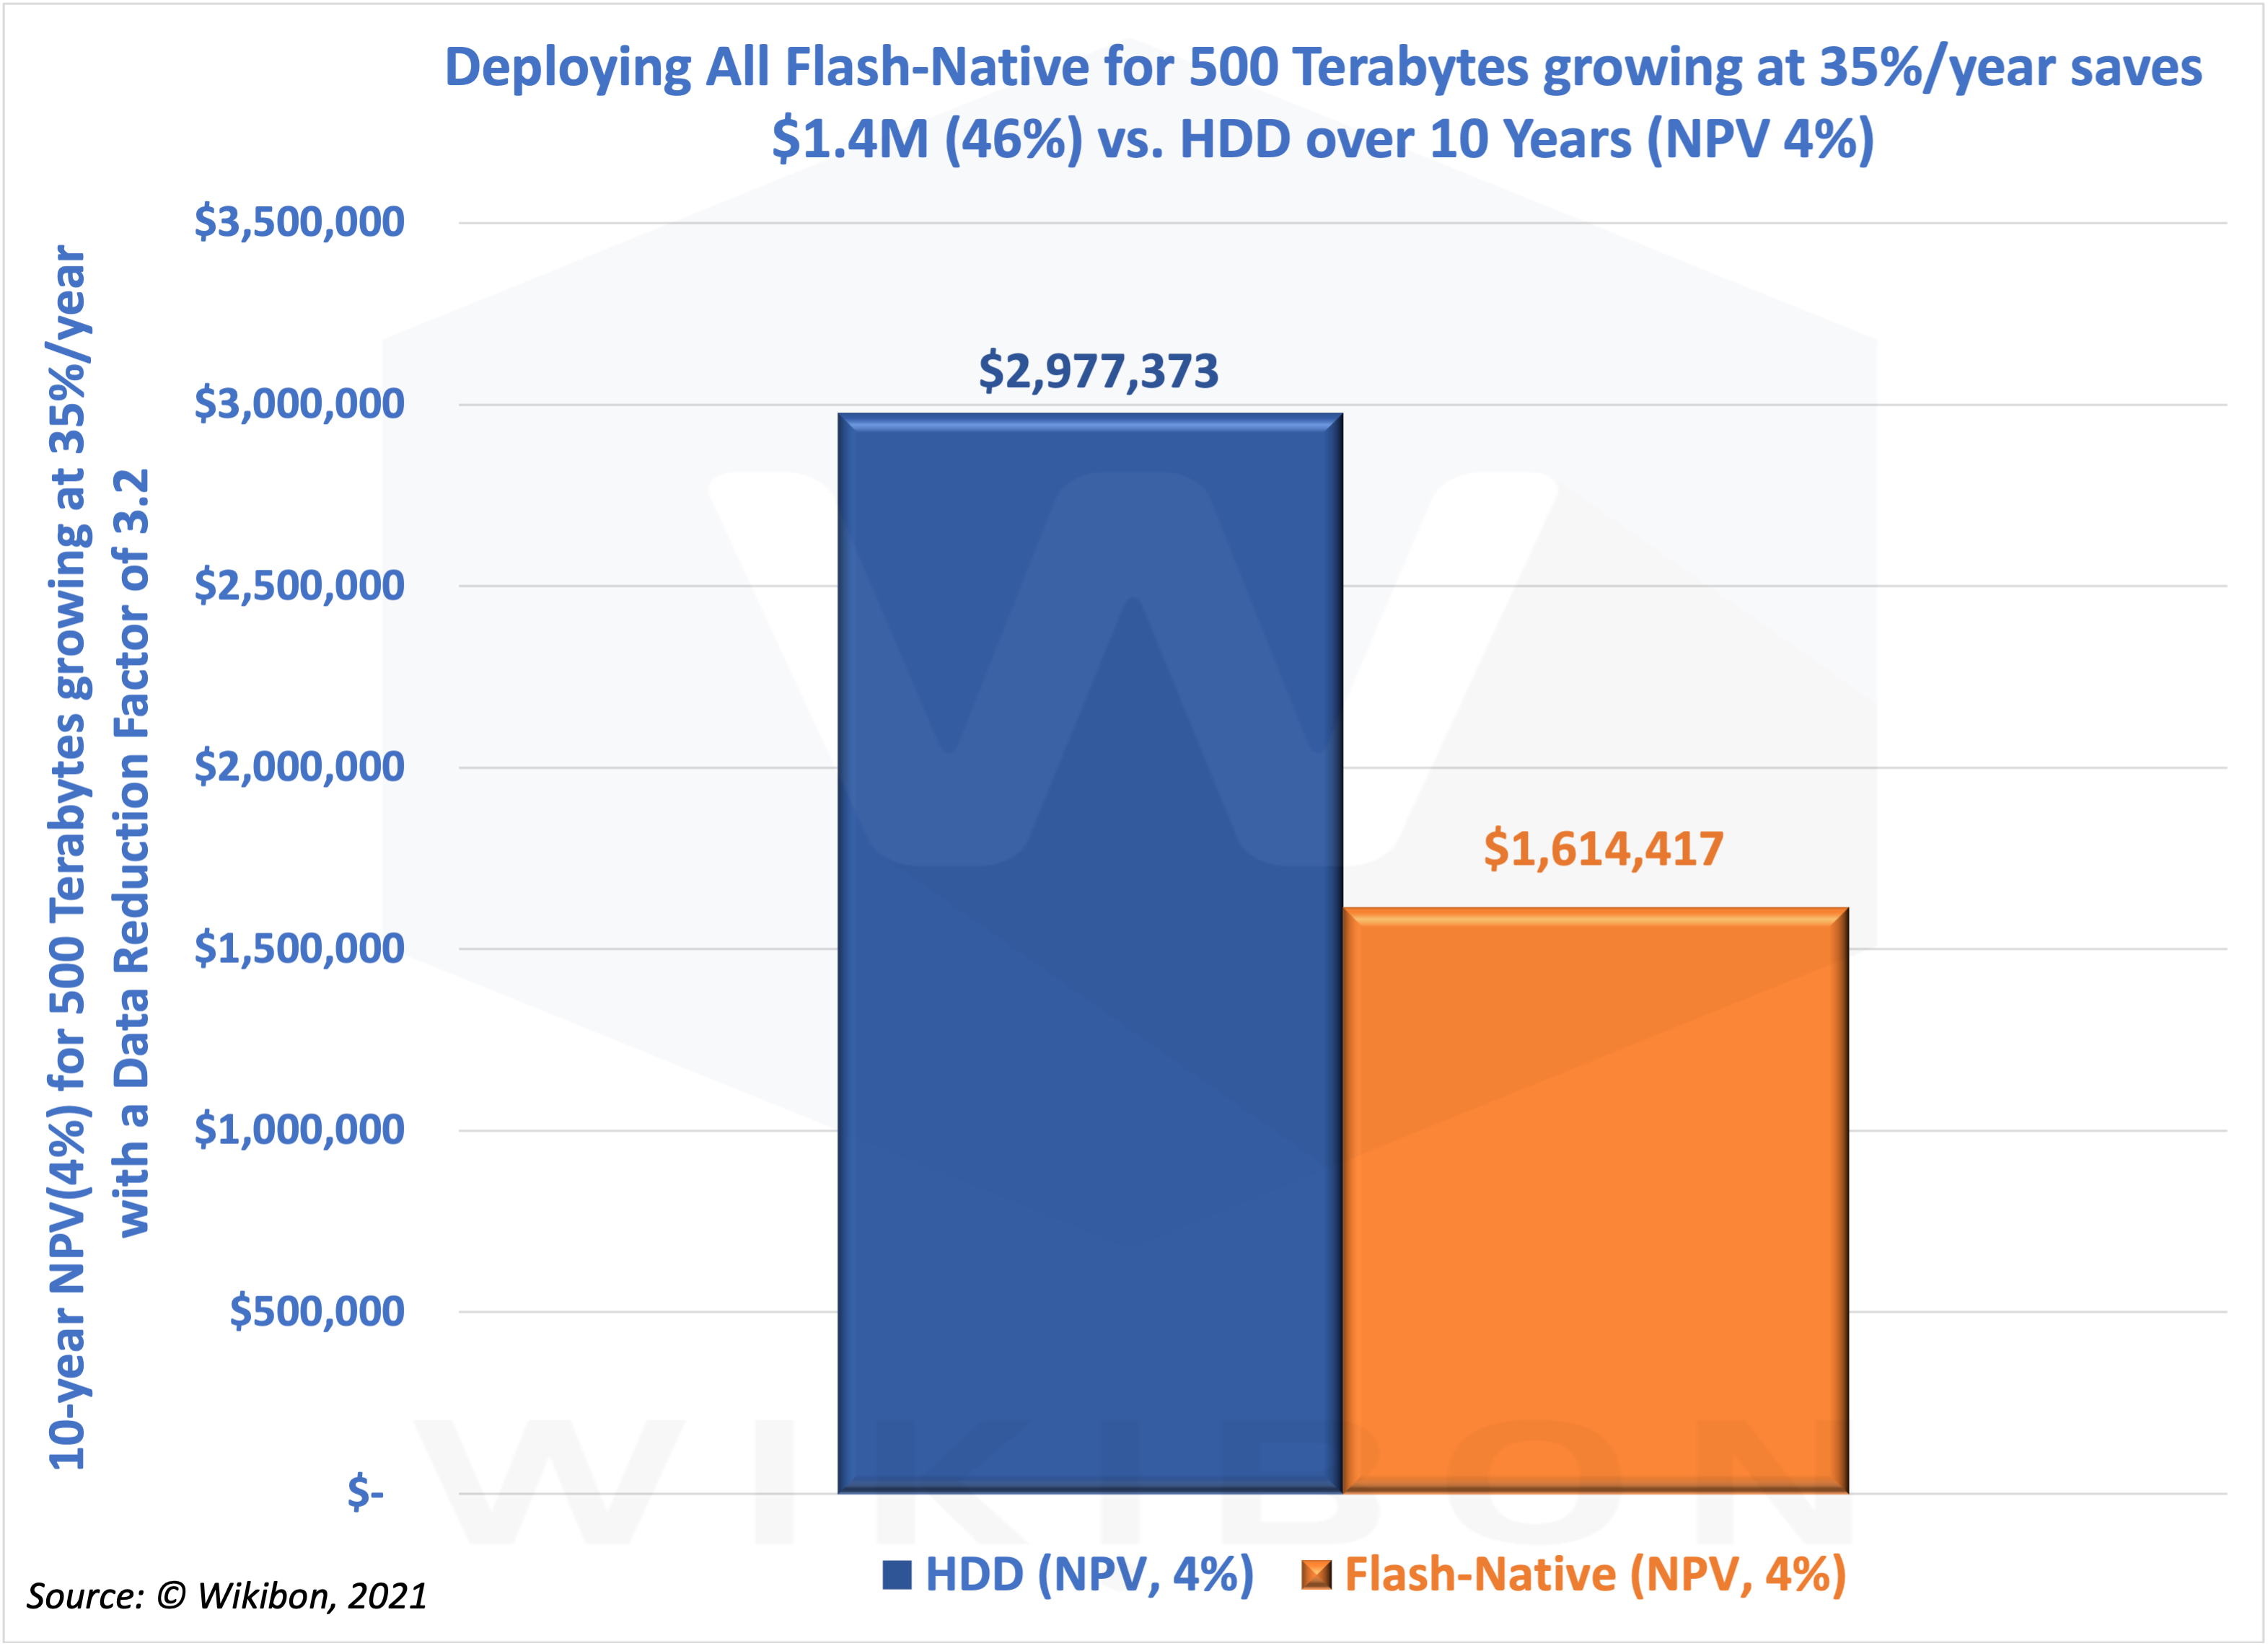 The Business Case for Flash-Native